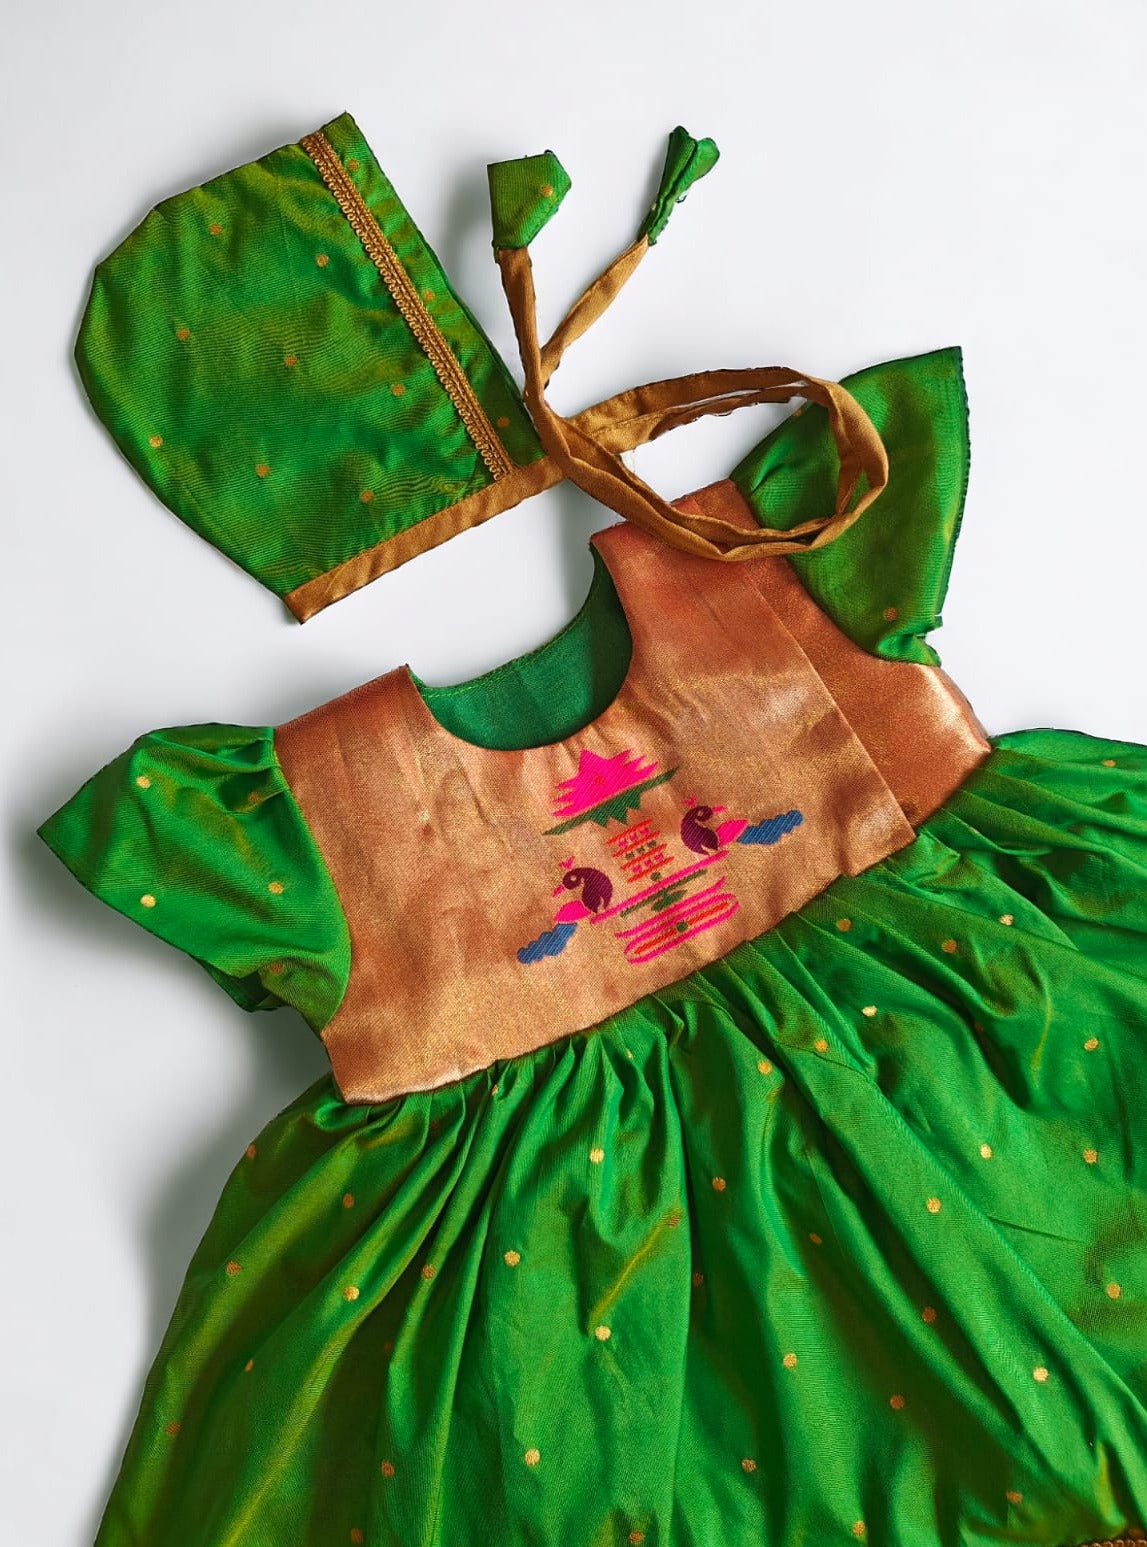 Parrot Green Paithani brocade silk,front open newborn dress for naming ceremony with bonnet, bloomer & booties.It's the perfect outfit for your baby's naming ceremony,naamkaran or annaprashan ceremony.Traditional dress for Noolukettu Ceremony,Pachavi Puja,cradle ceremony,Rice Ceremony,Chatti Puja etc.Apt gifting idea 